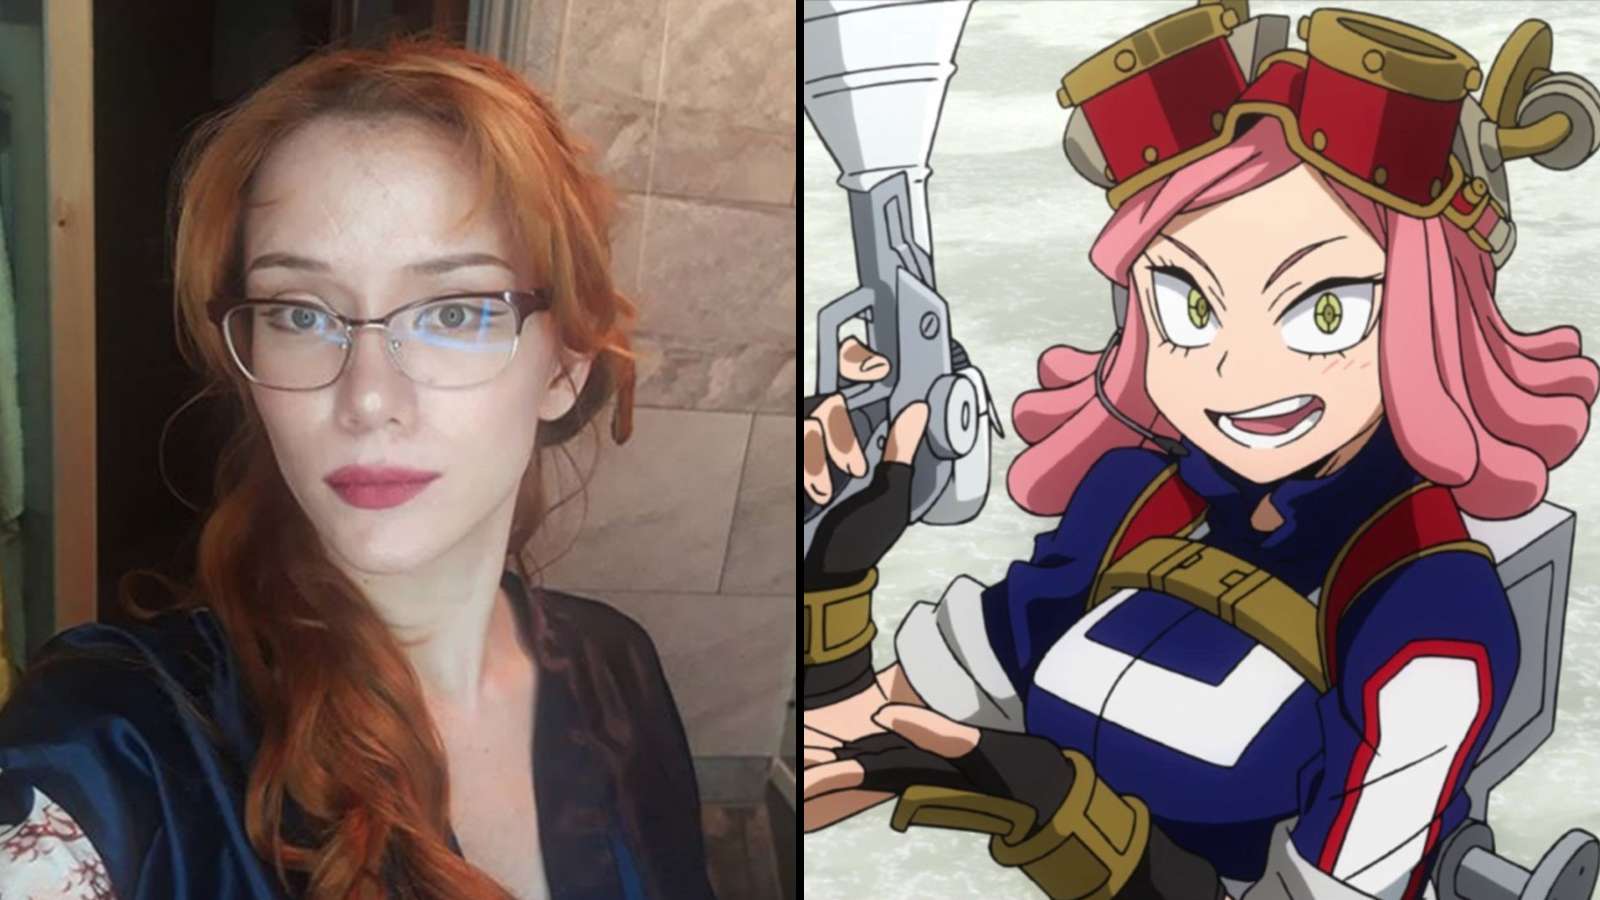 Cosplayer anpanman_cos2 and Mei Hatsume.